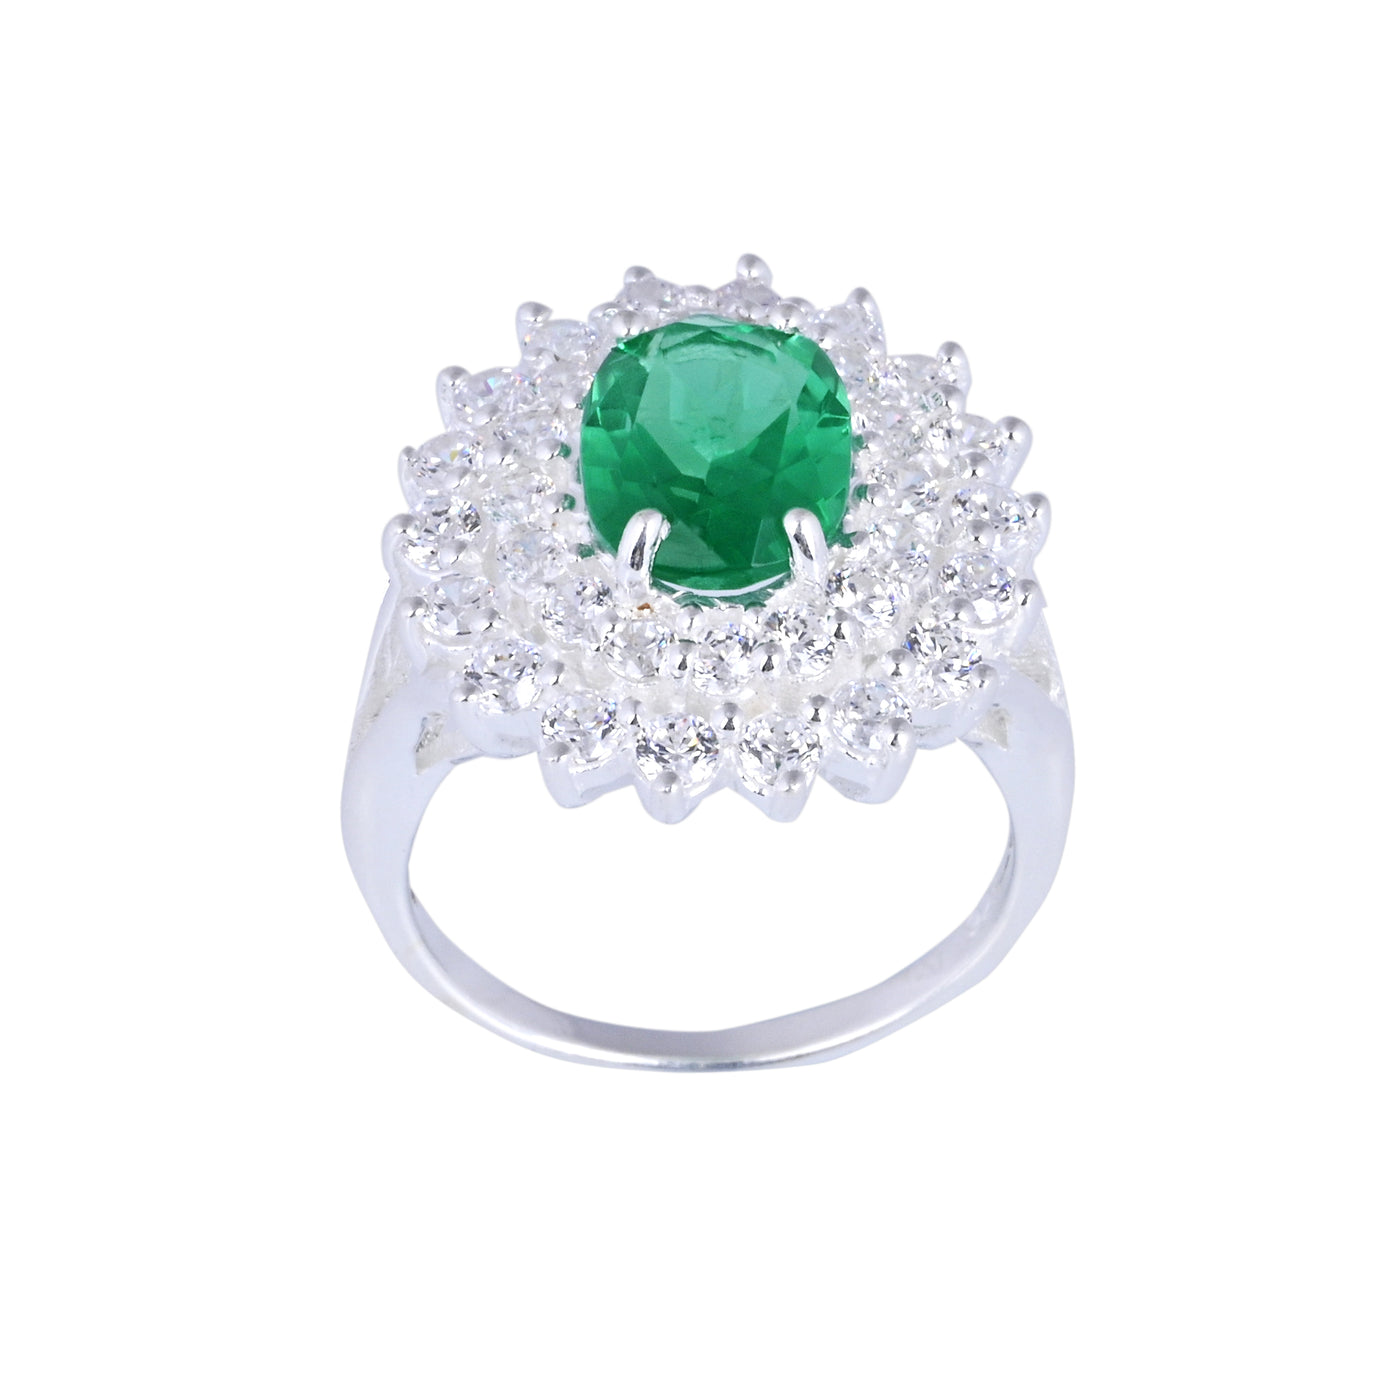 Emerald and Diamonds Statement Ring - 14k White Gold Plated